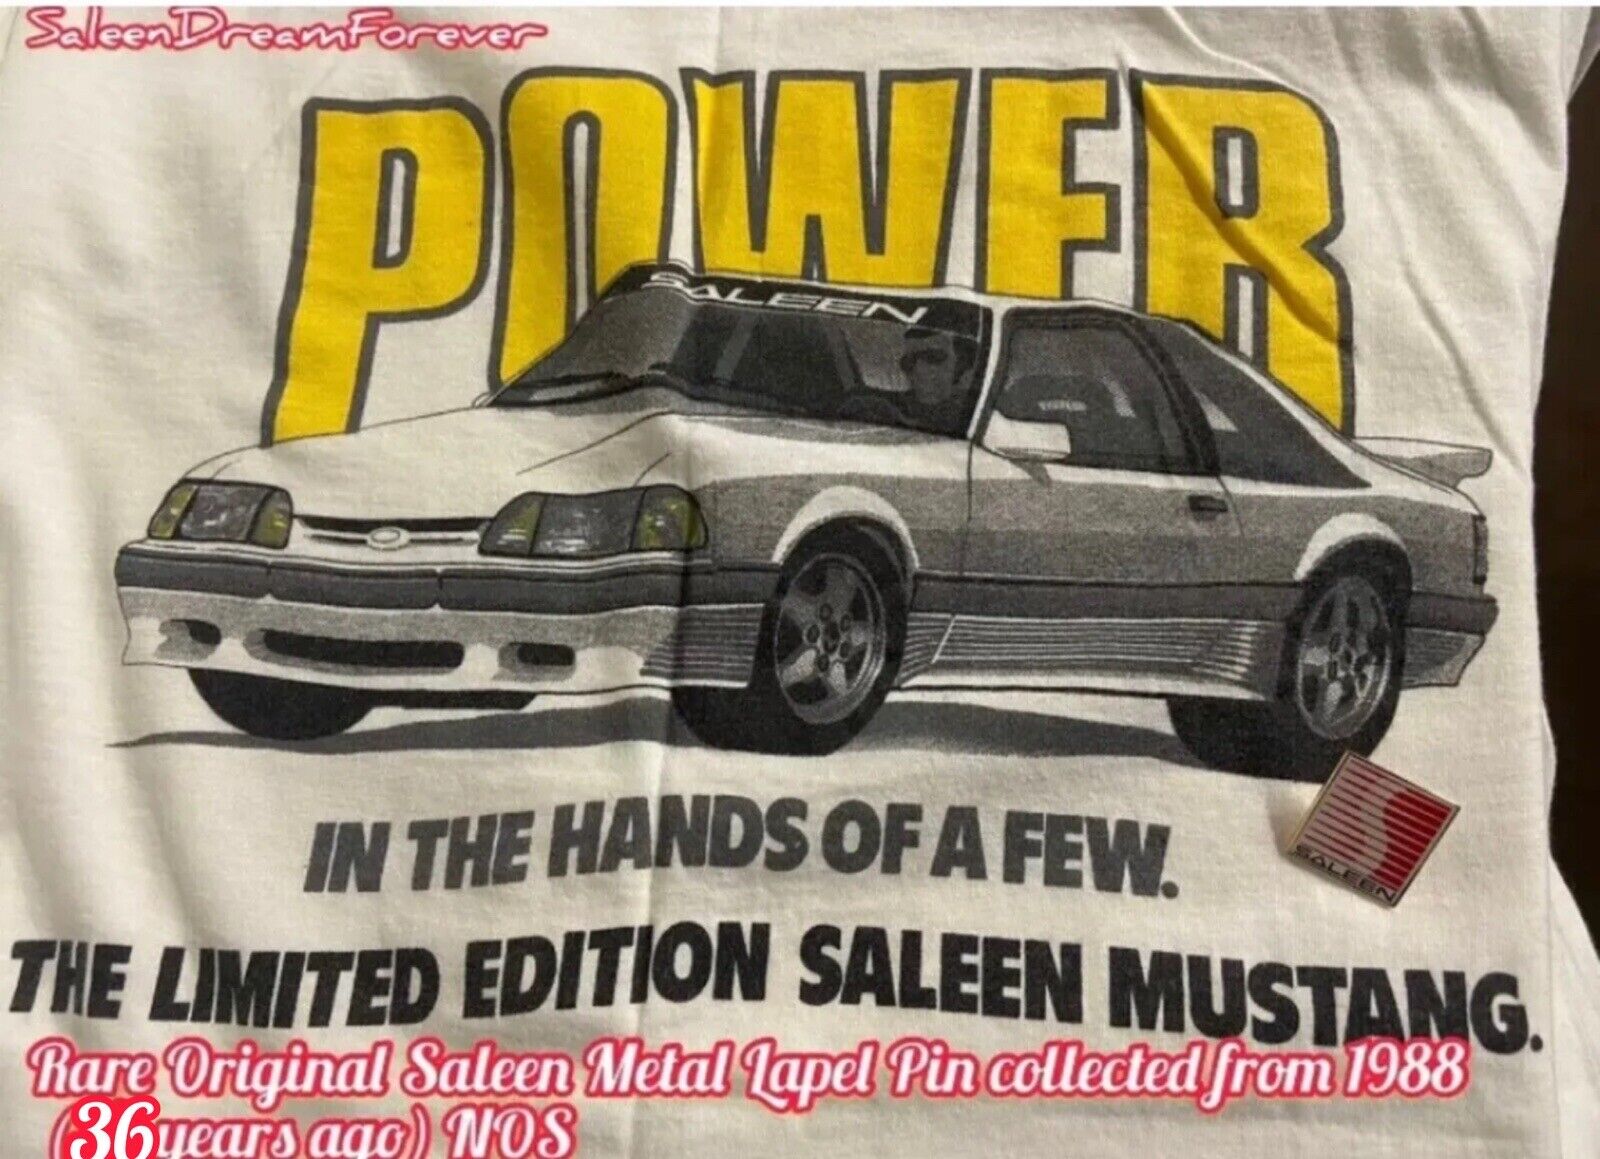 RARE SALEEN METAL LAPEL PIN FRM 1988 NOS FOXBODY SSC MUSTANG FORD GT 302 5.0  